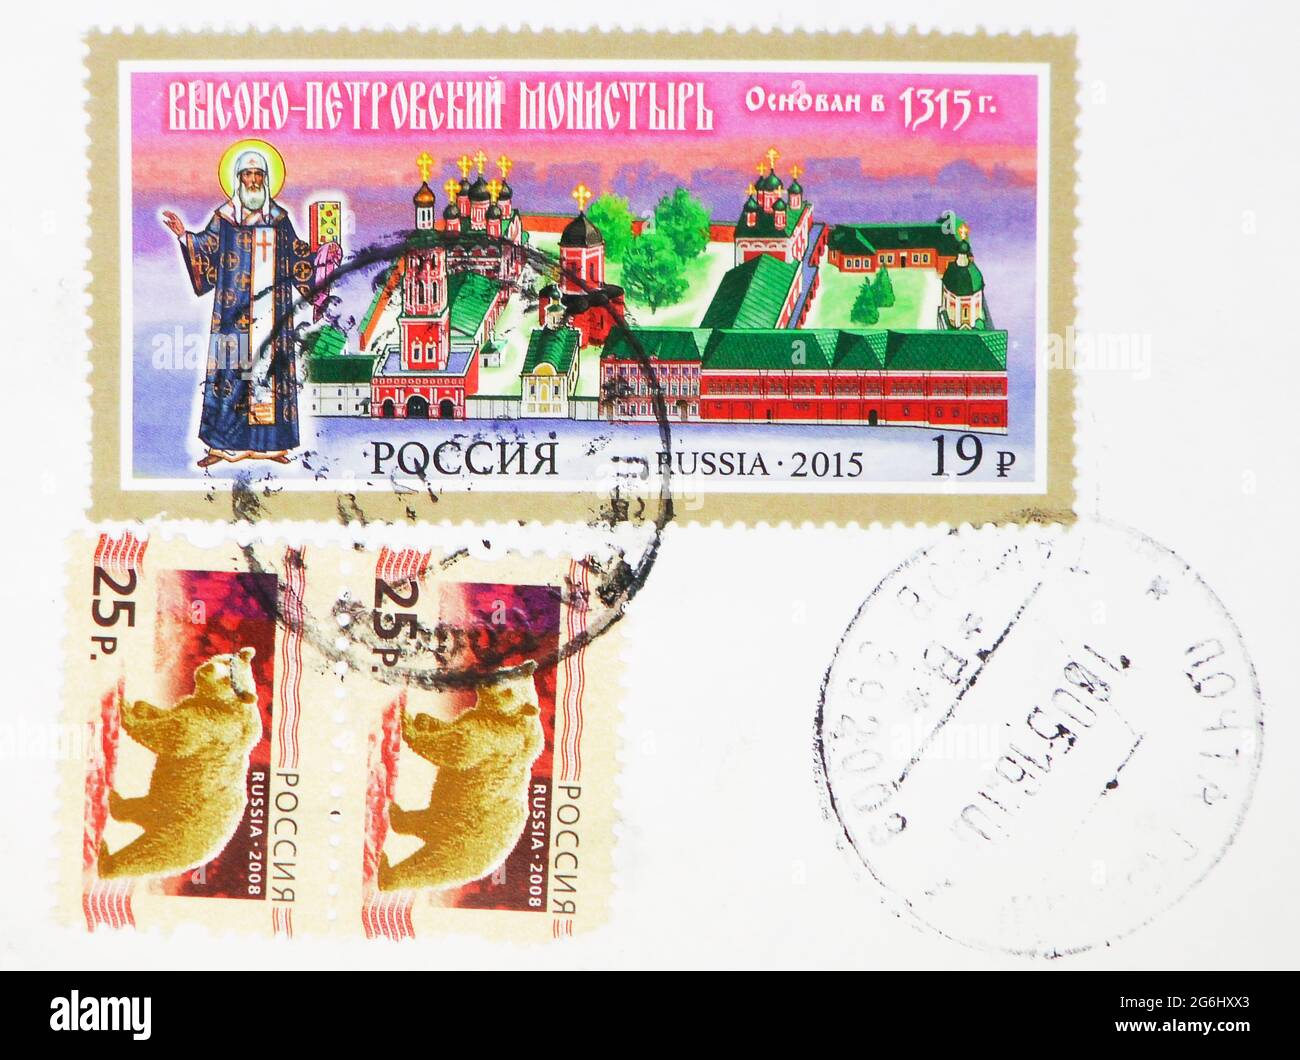 MOSCOW, RUSSIA - MARCH 4, 2020: Postage stamp printed in Russia with stamp of Tambov devoted to The 700th Foundation Anniversary of the Vysokopetrovsk Stock Photo